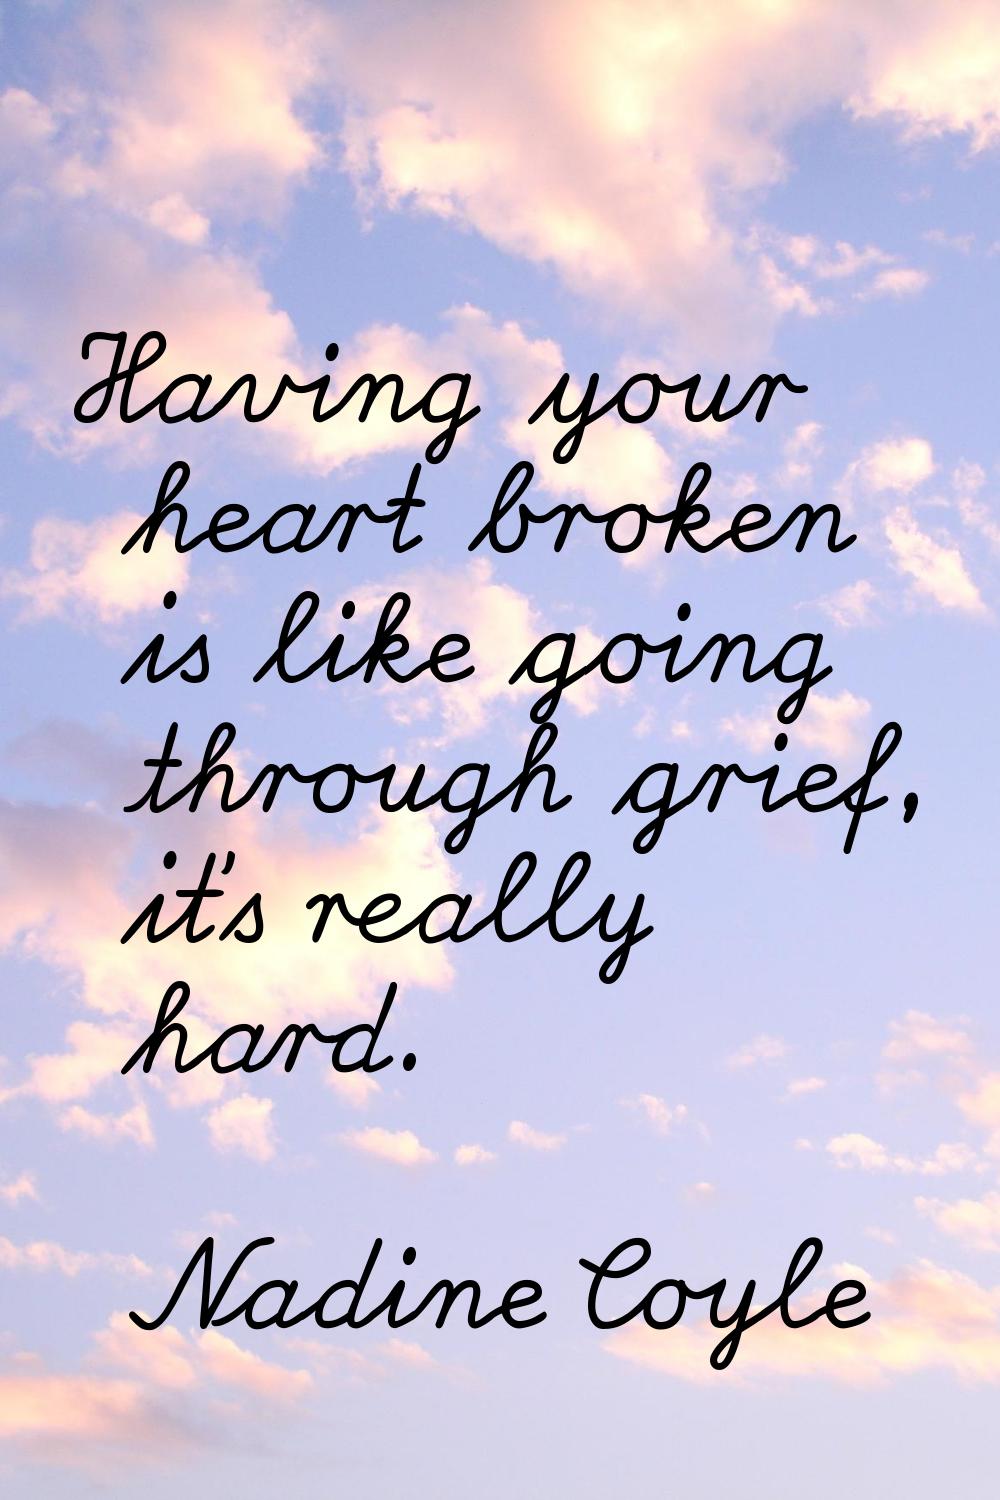 Having your heart broken is like going through grief, it's really hard.